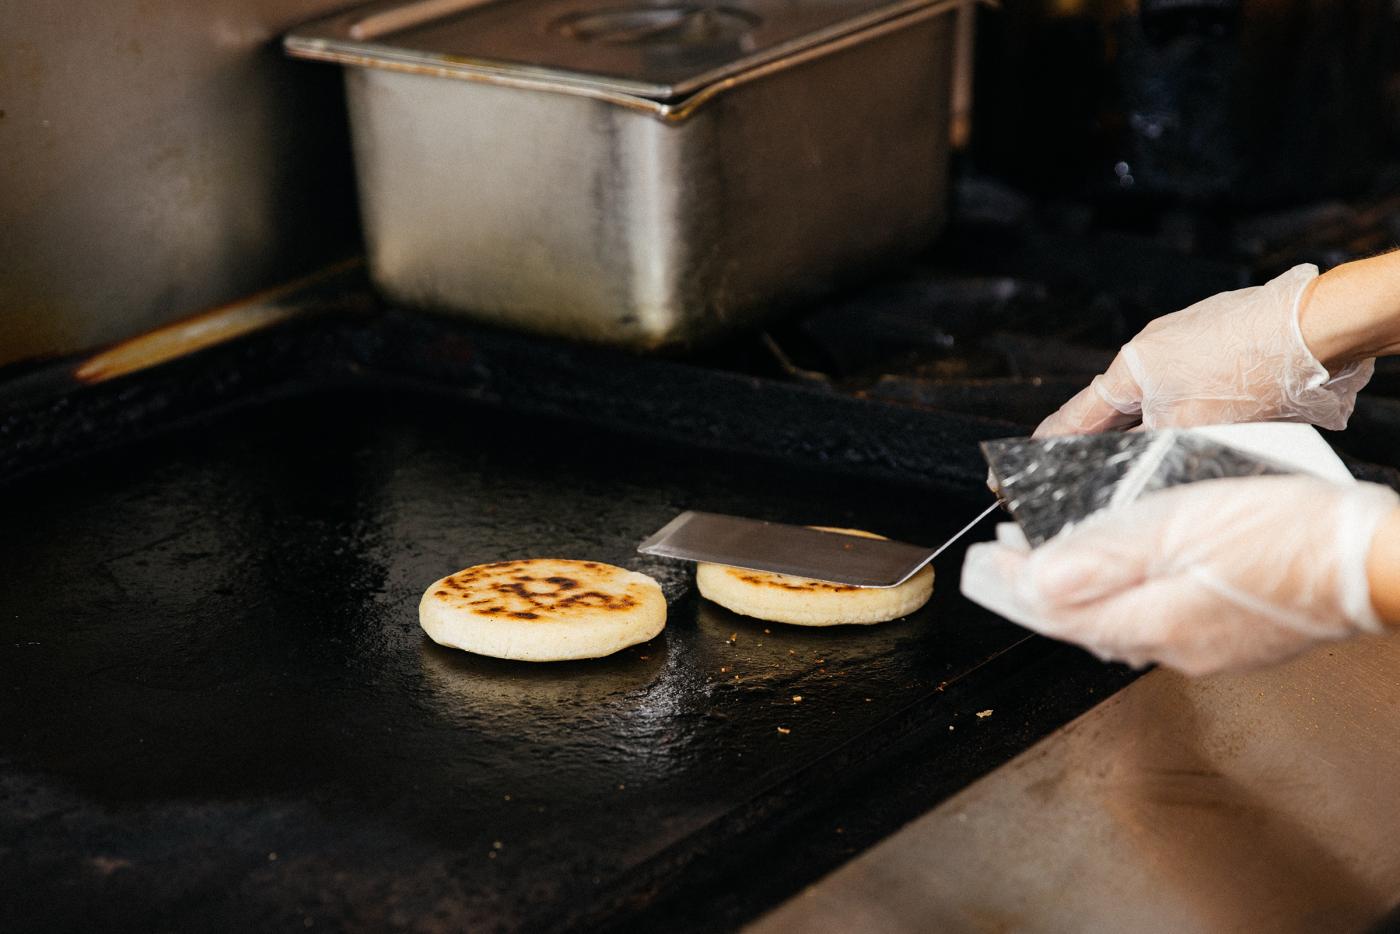 Andrea Andrade cooking arepas on the griddle at Sweet Pepper Venezuelan Food Bar. Photo: Sandy Noto for WTTW